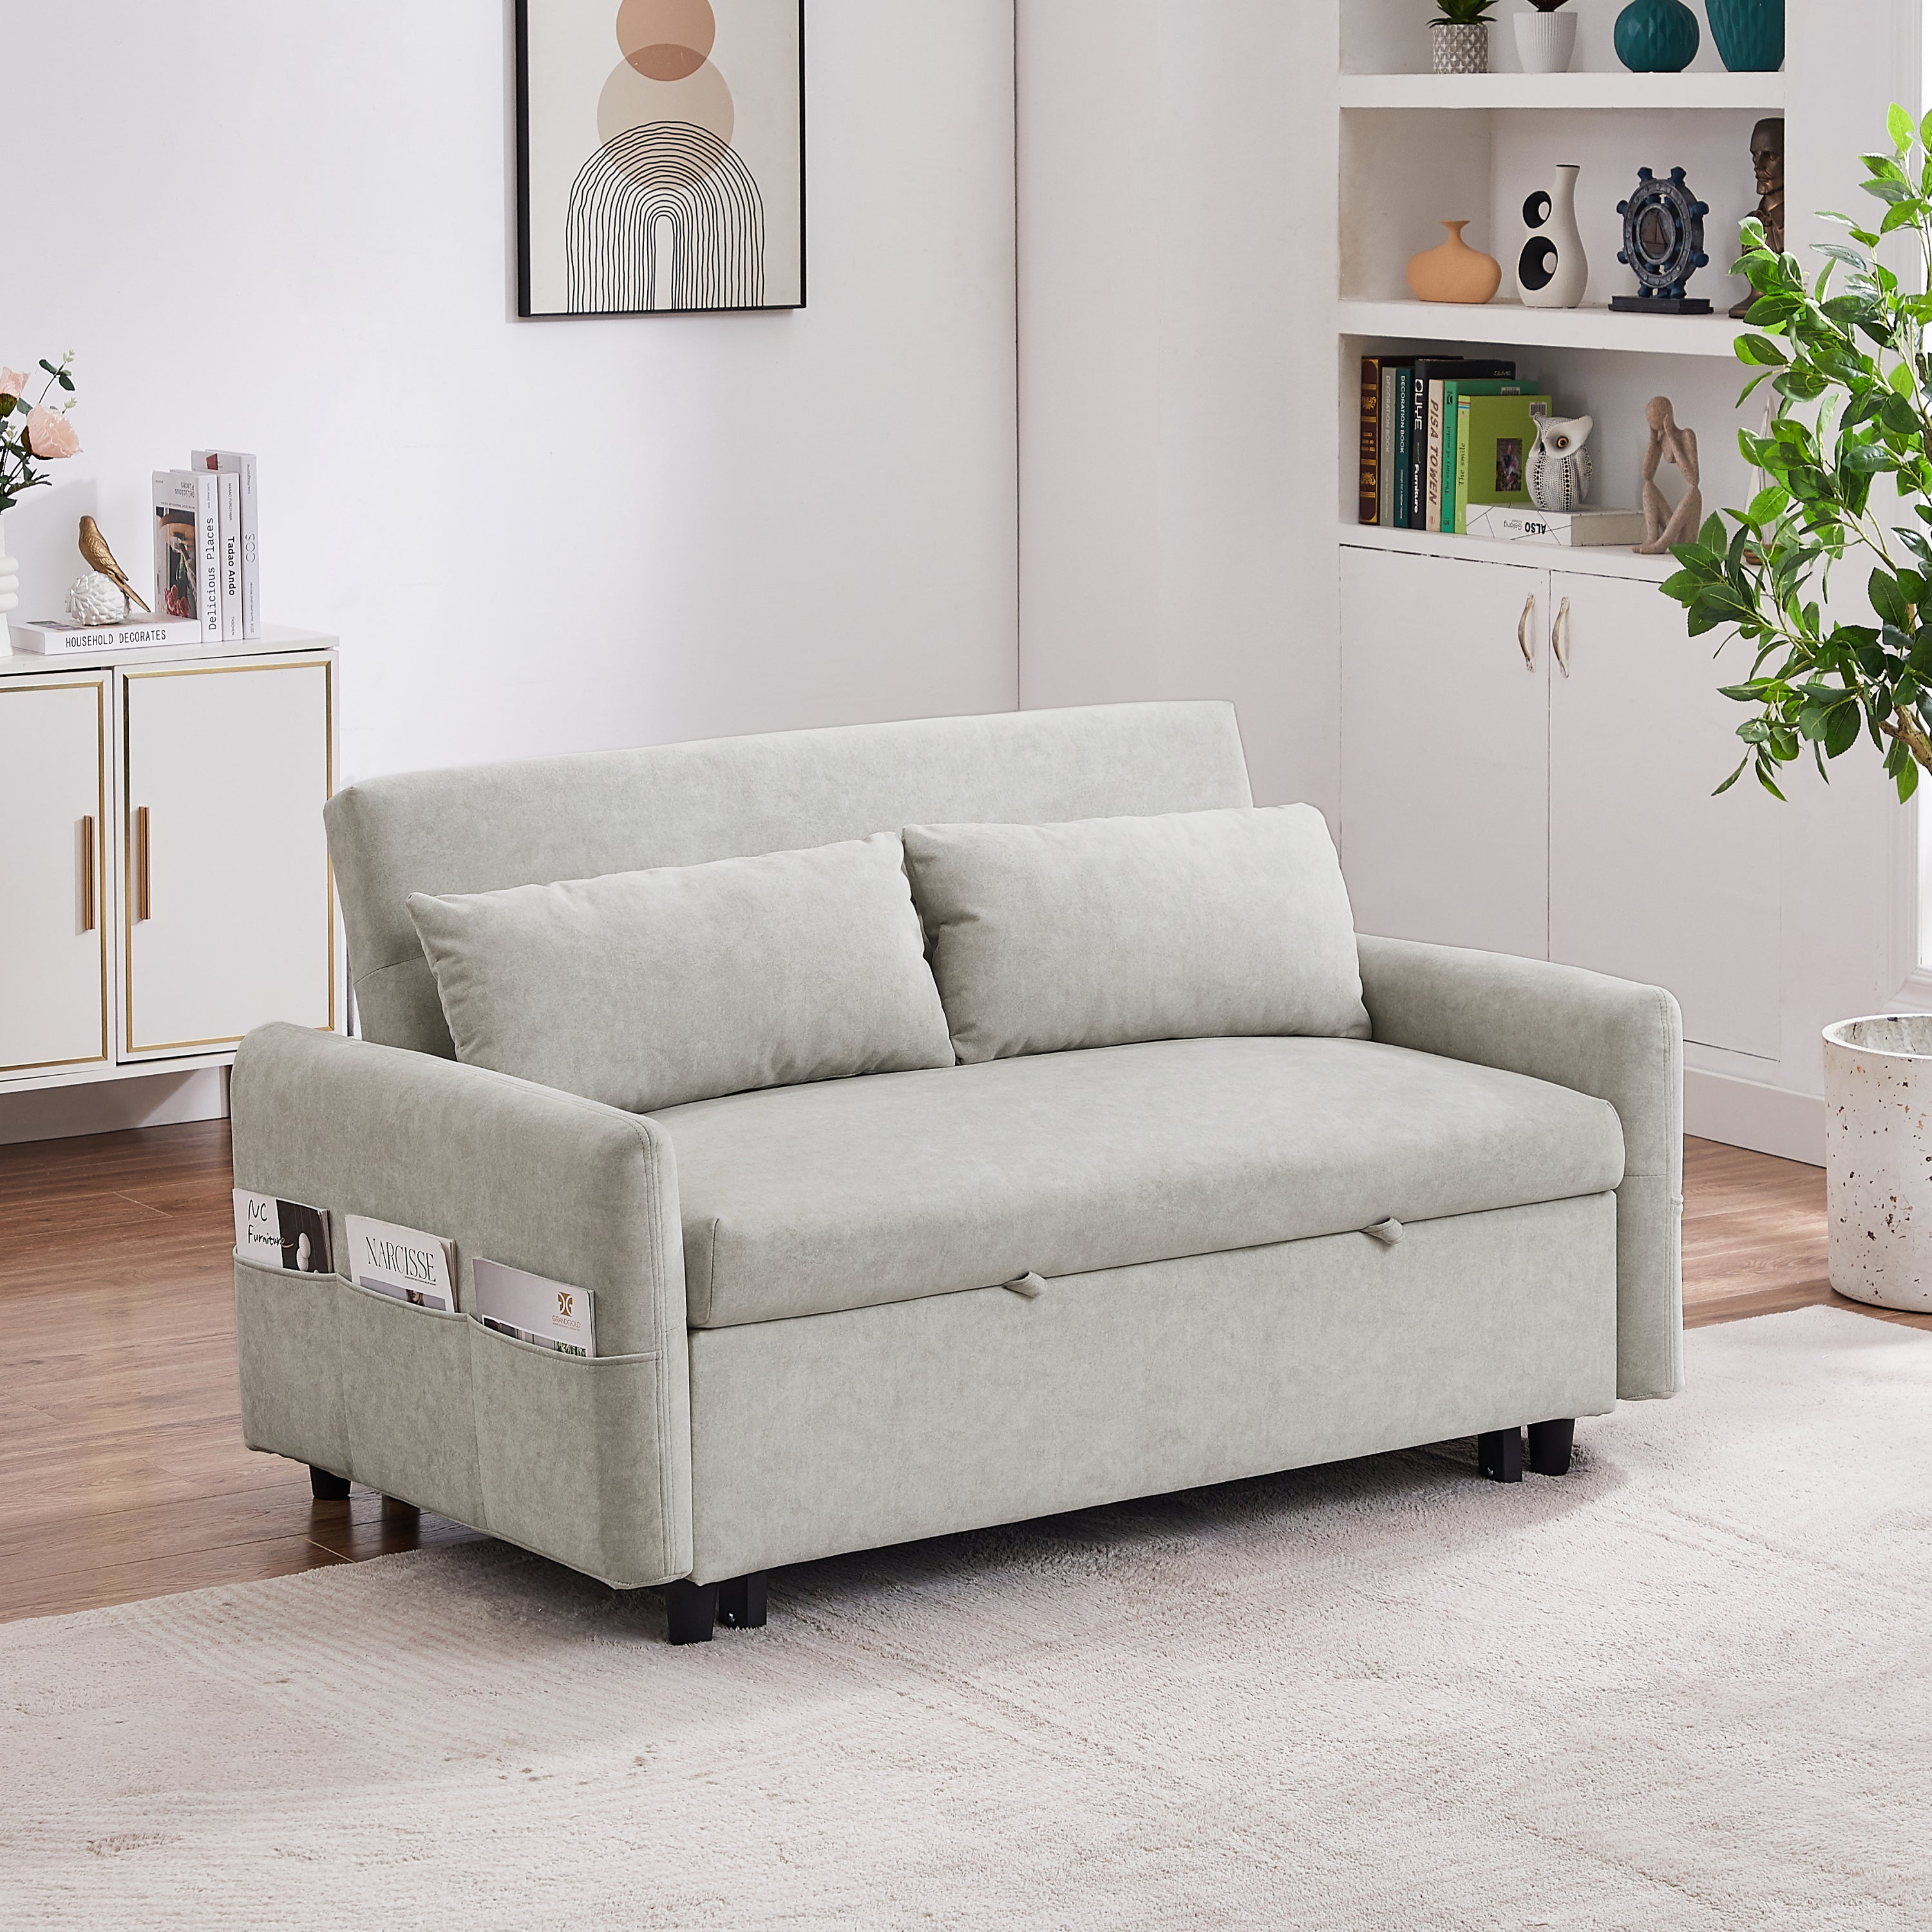 Mikas 55" beige Micofiber Pull Out Sleep Sofa Bed with USB Ports and Storage Pockets